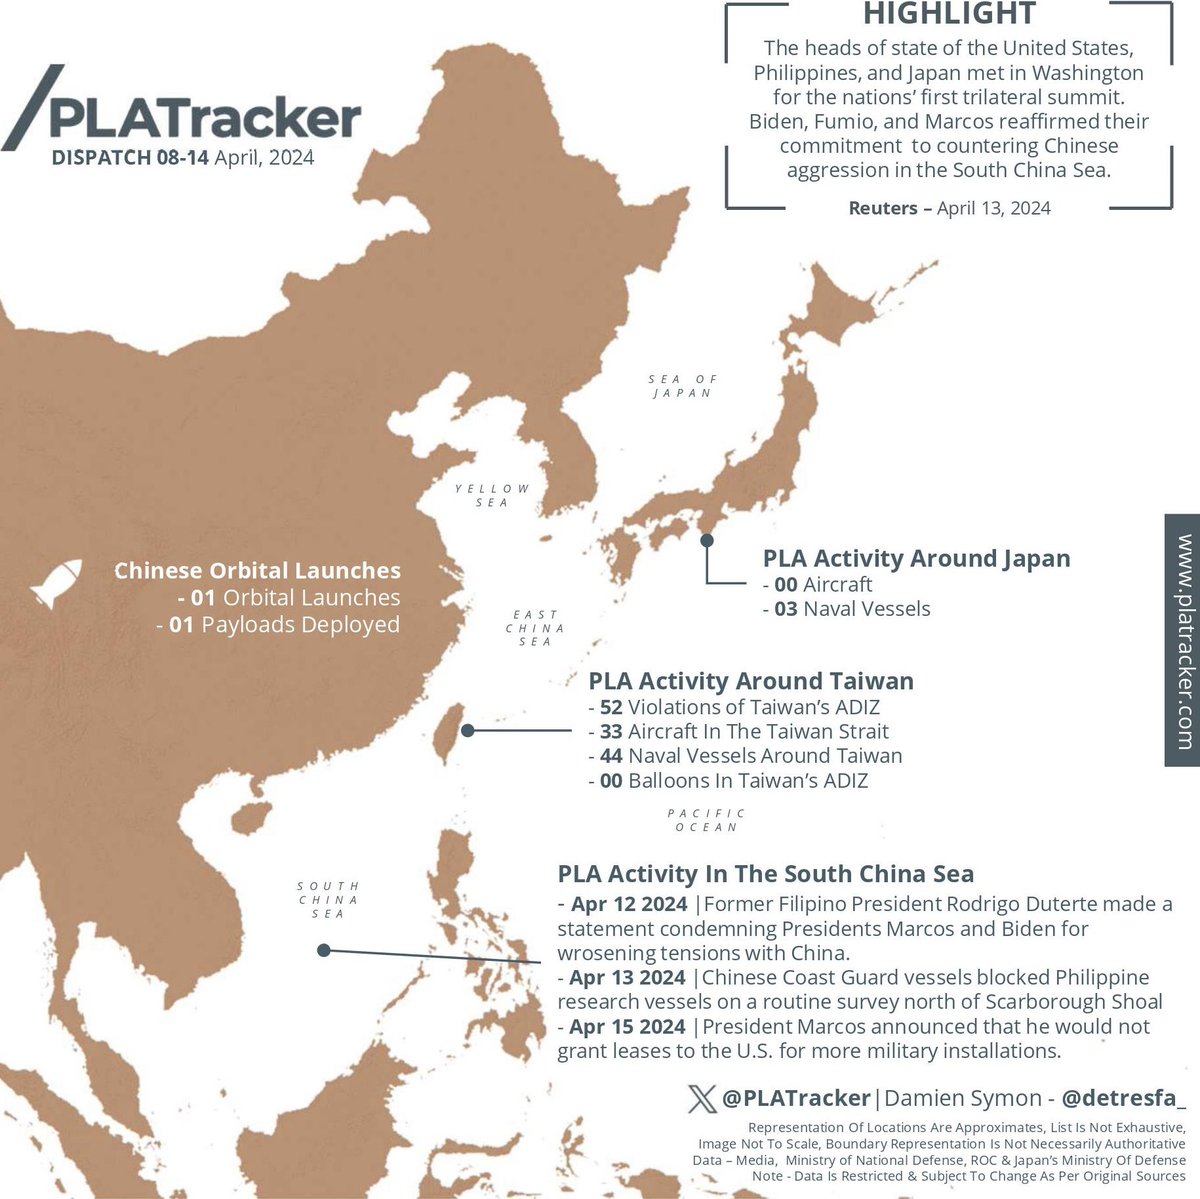 PLATracker DISPATCH 08 - 14 April 2024 Partnering with @detresfa_ we track heightened PLA activity around Taiwan, key developments in the South China Sea, and more: